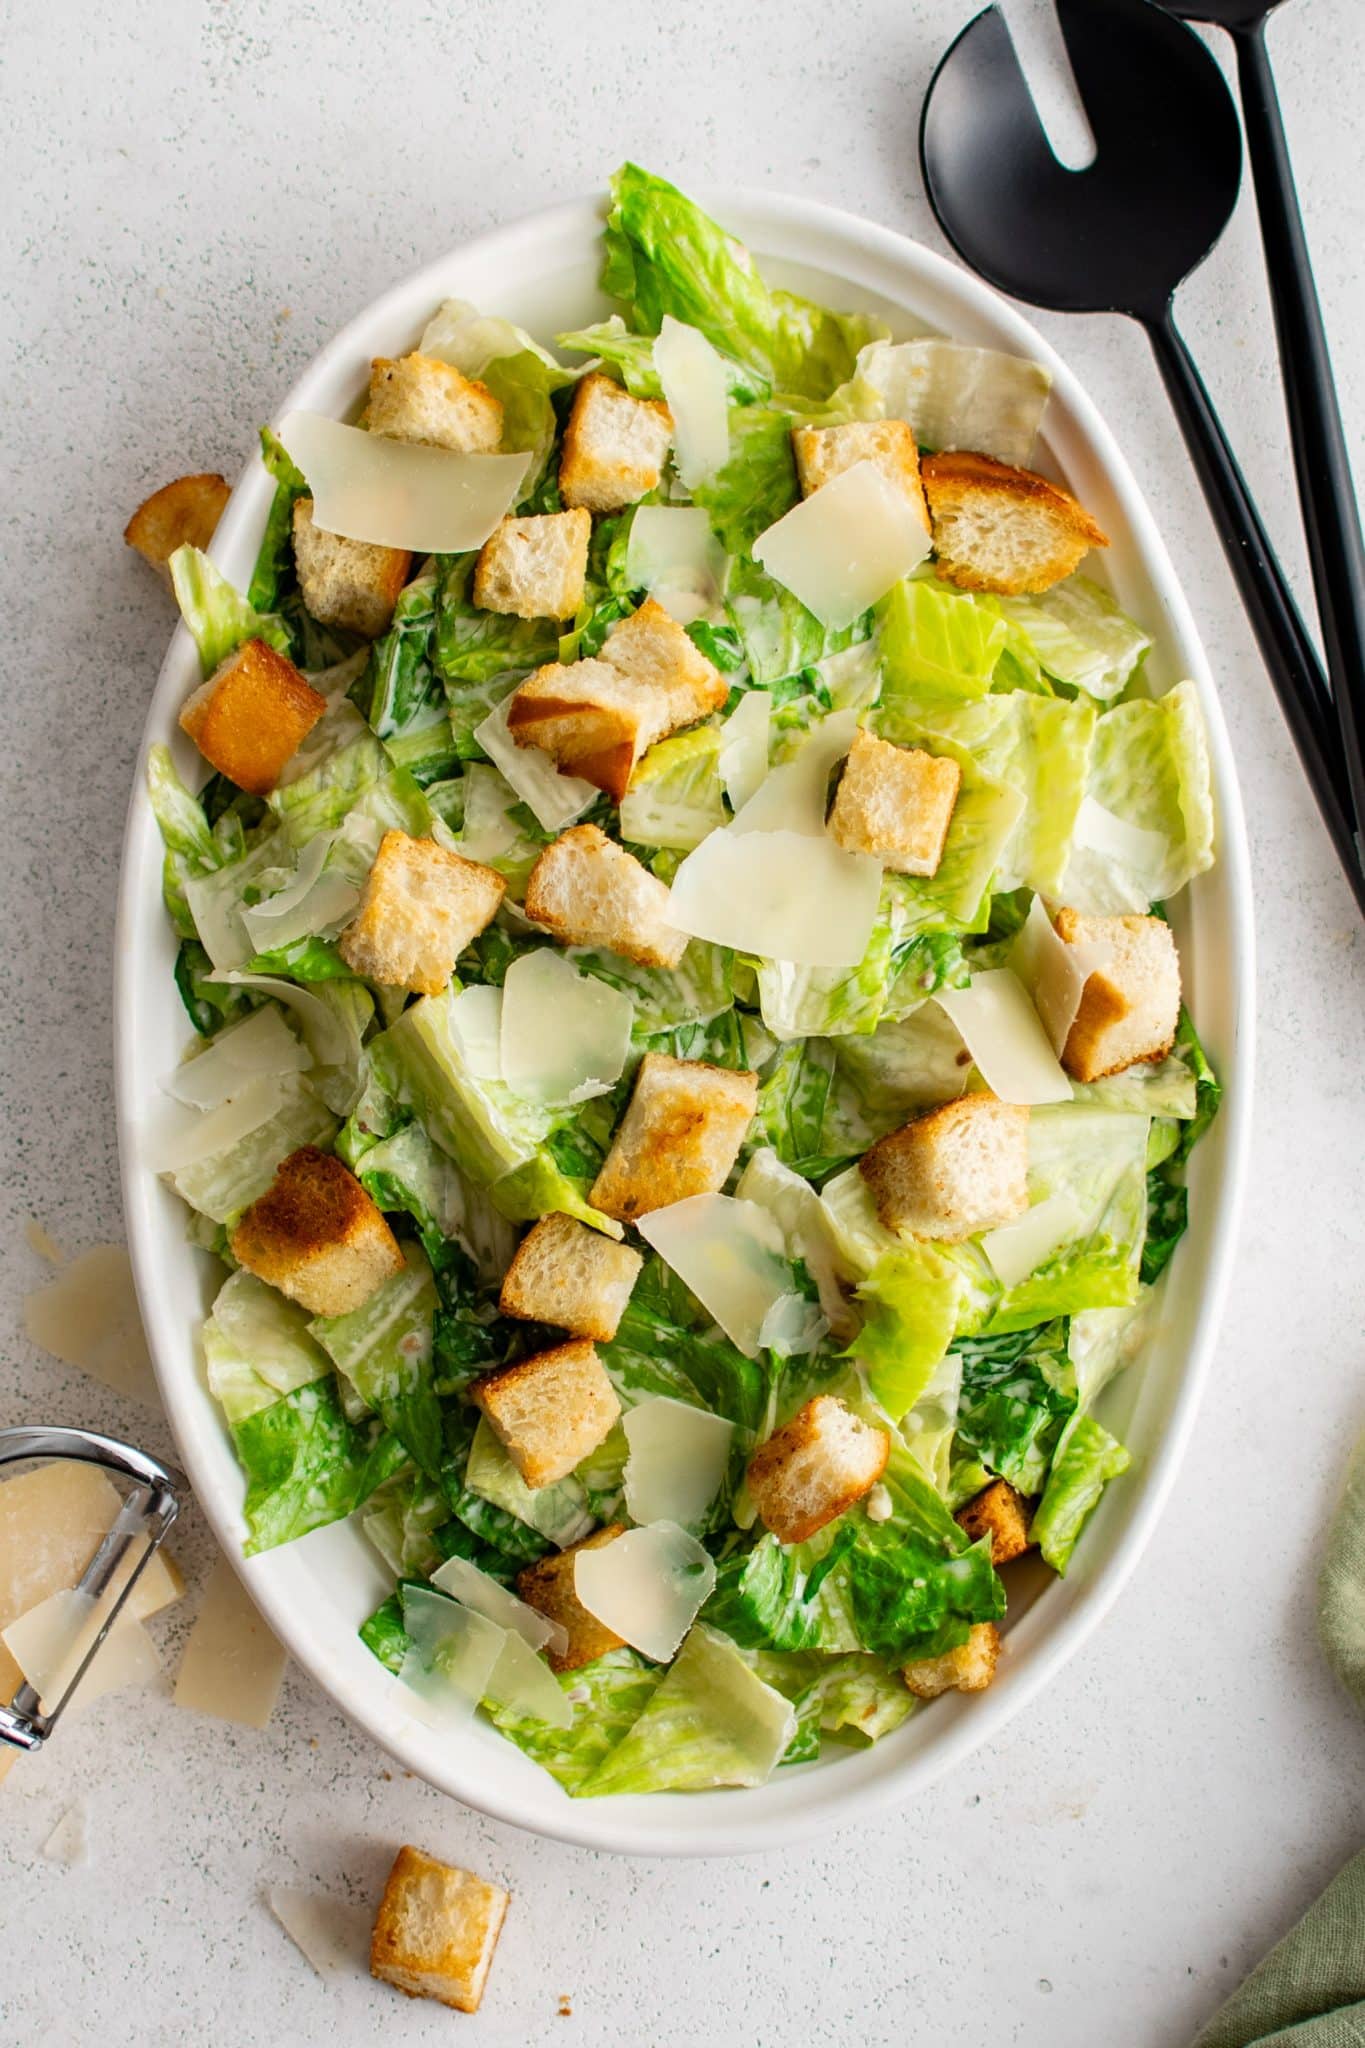 Oval salad plate filled with romaine lettuce tossed in homemade Caesar salad dressing, homemade croutons and shaved parmesan cheese.